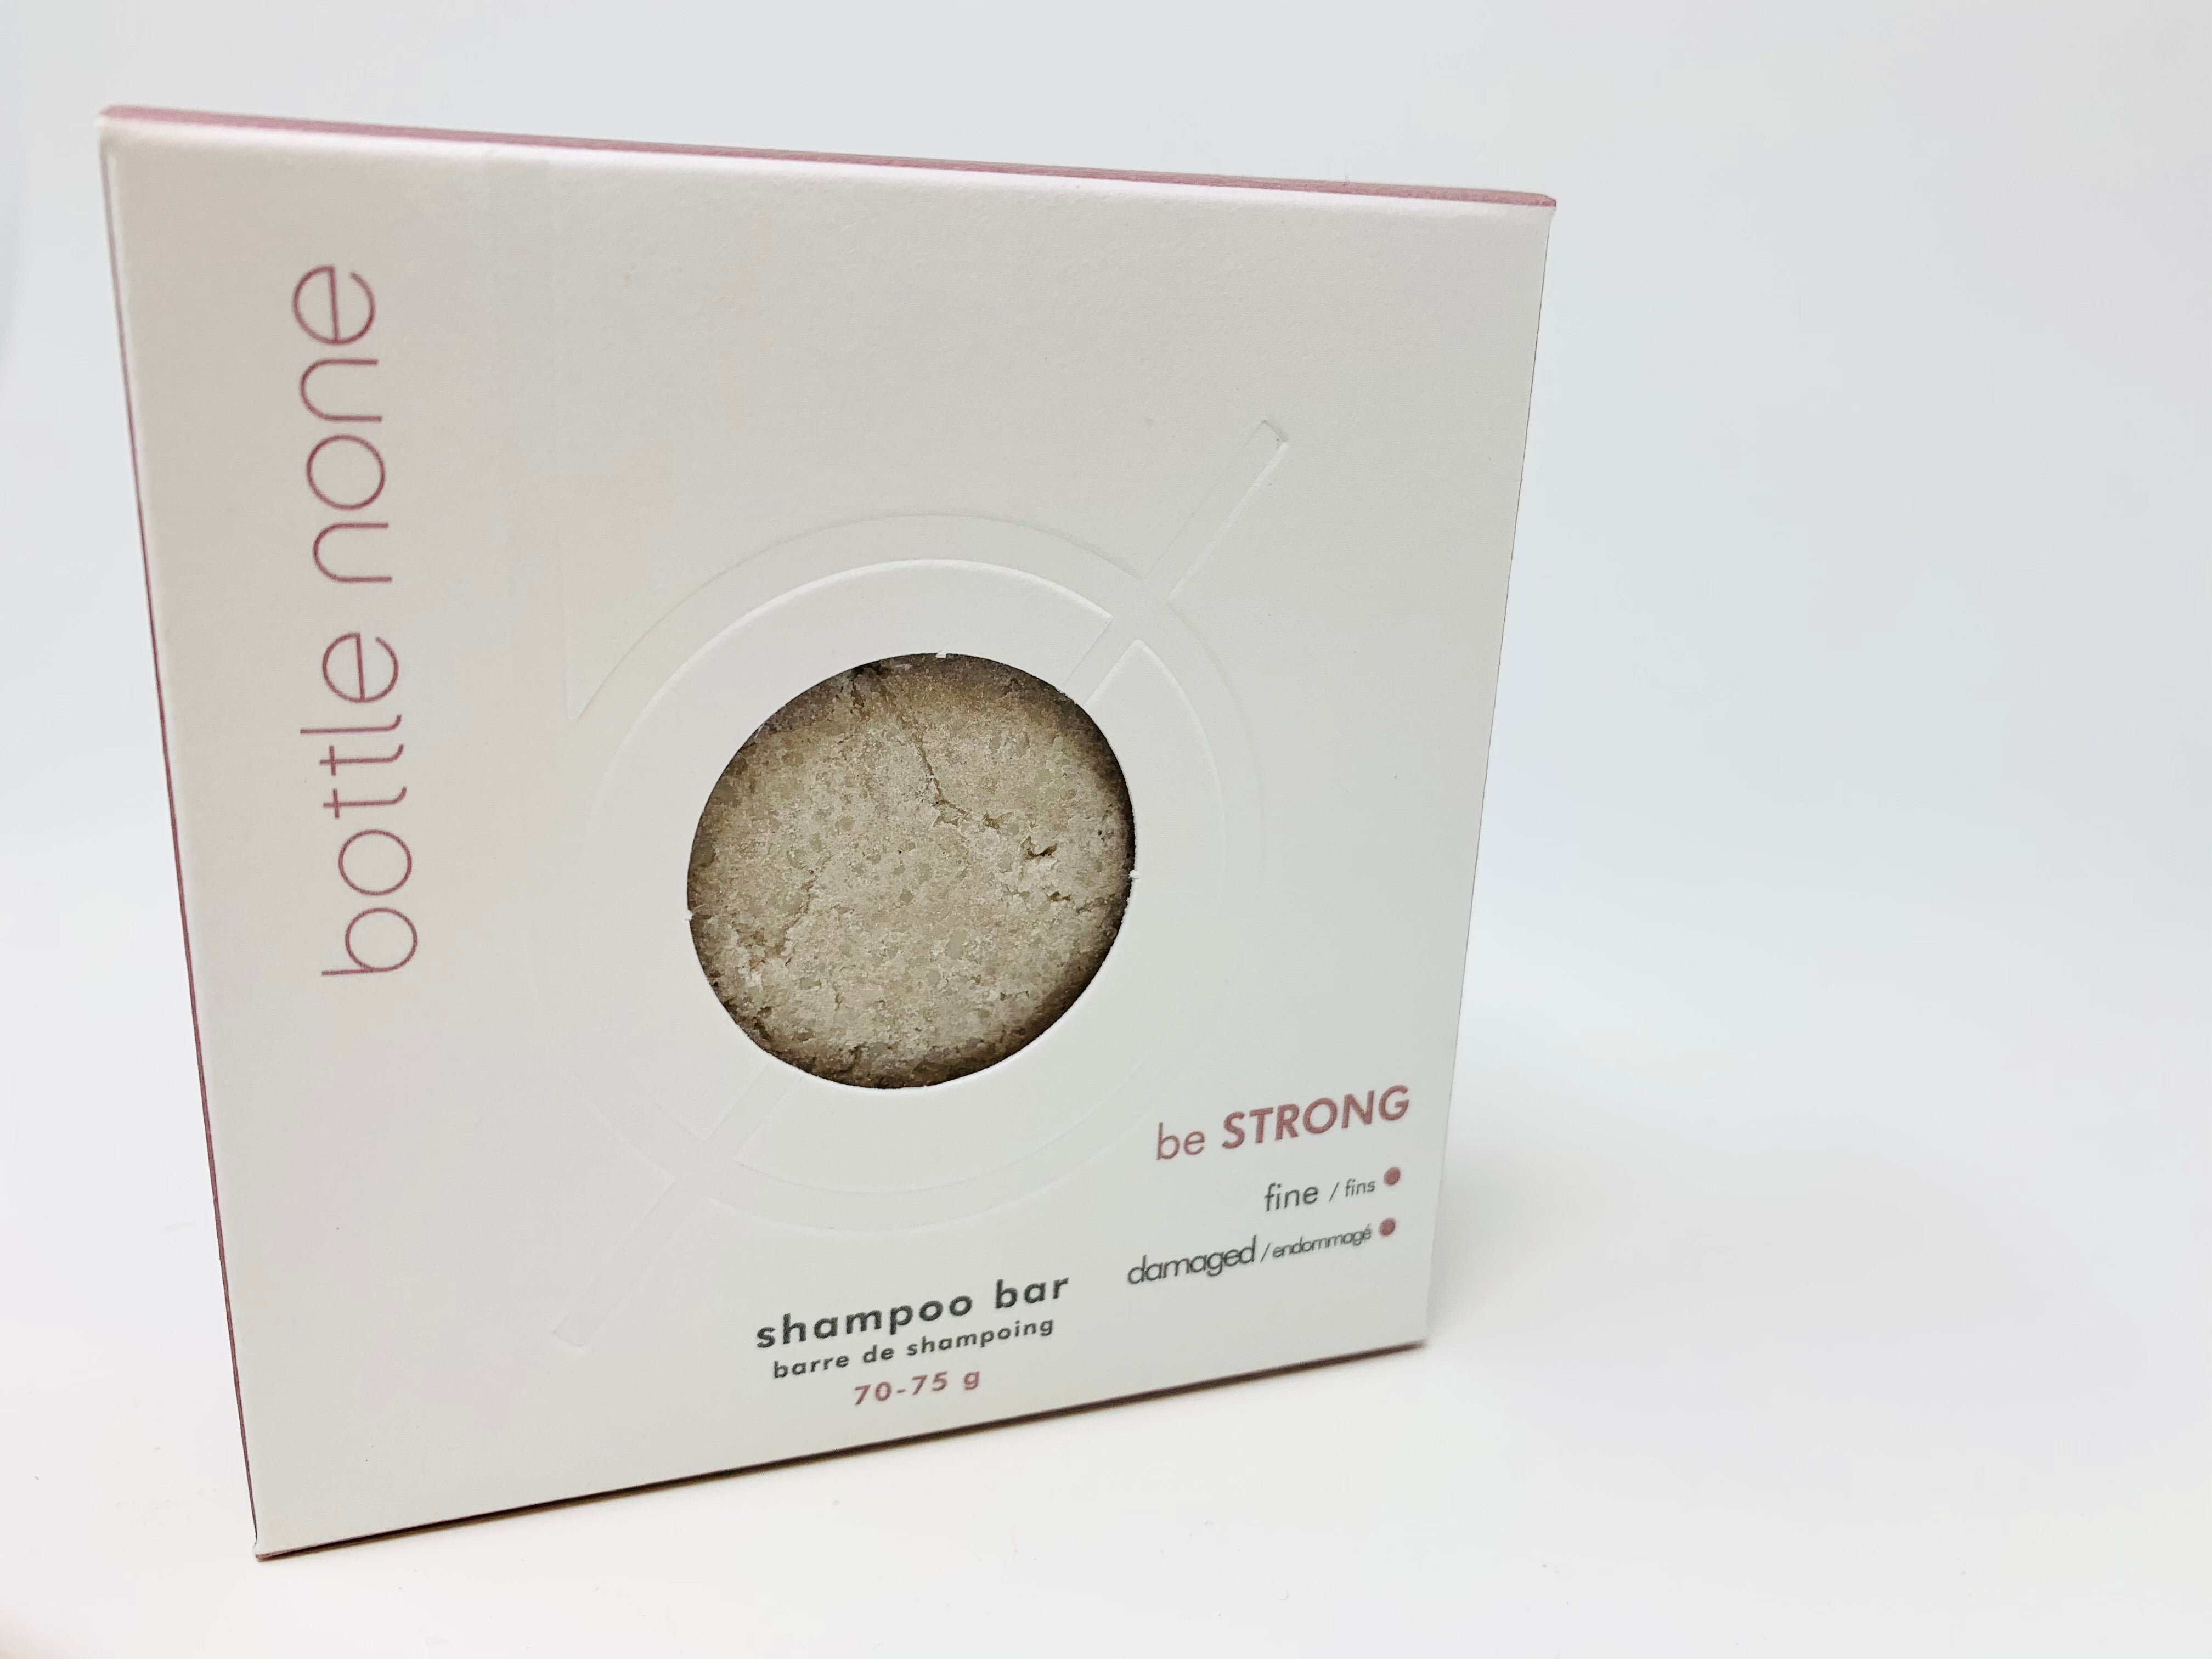 be STRONG Shampoo Bar 70-75g - WHOLESALE be STRONG - nelsonnaturals remineralizing toothpaste